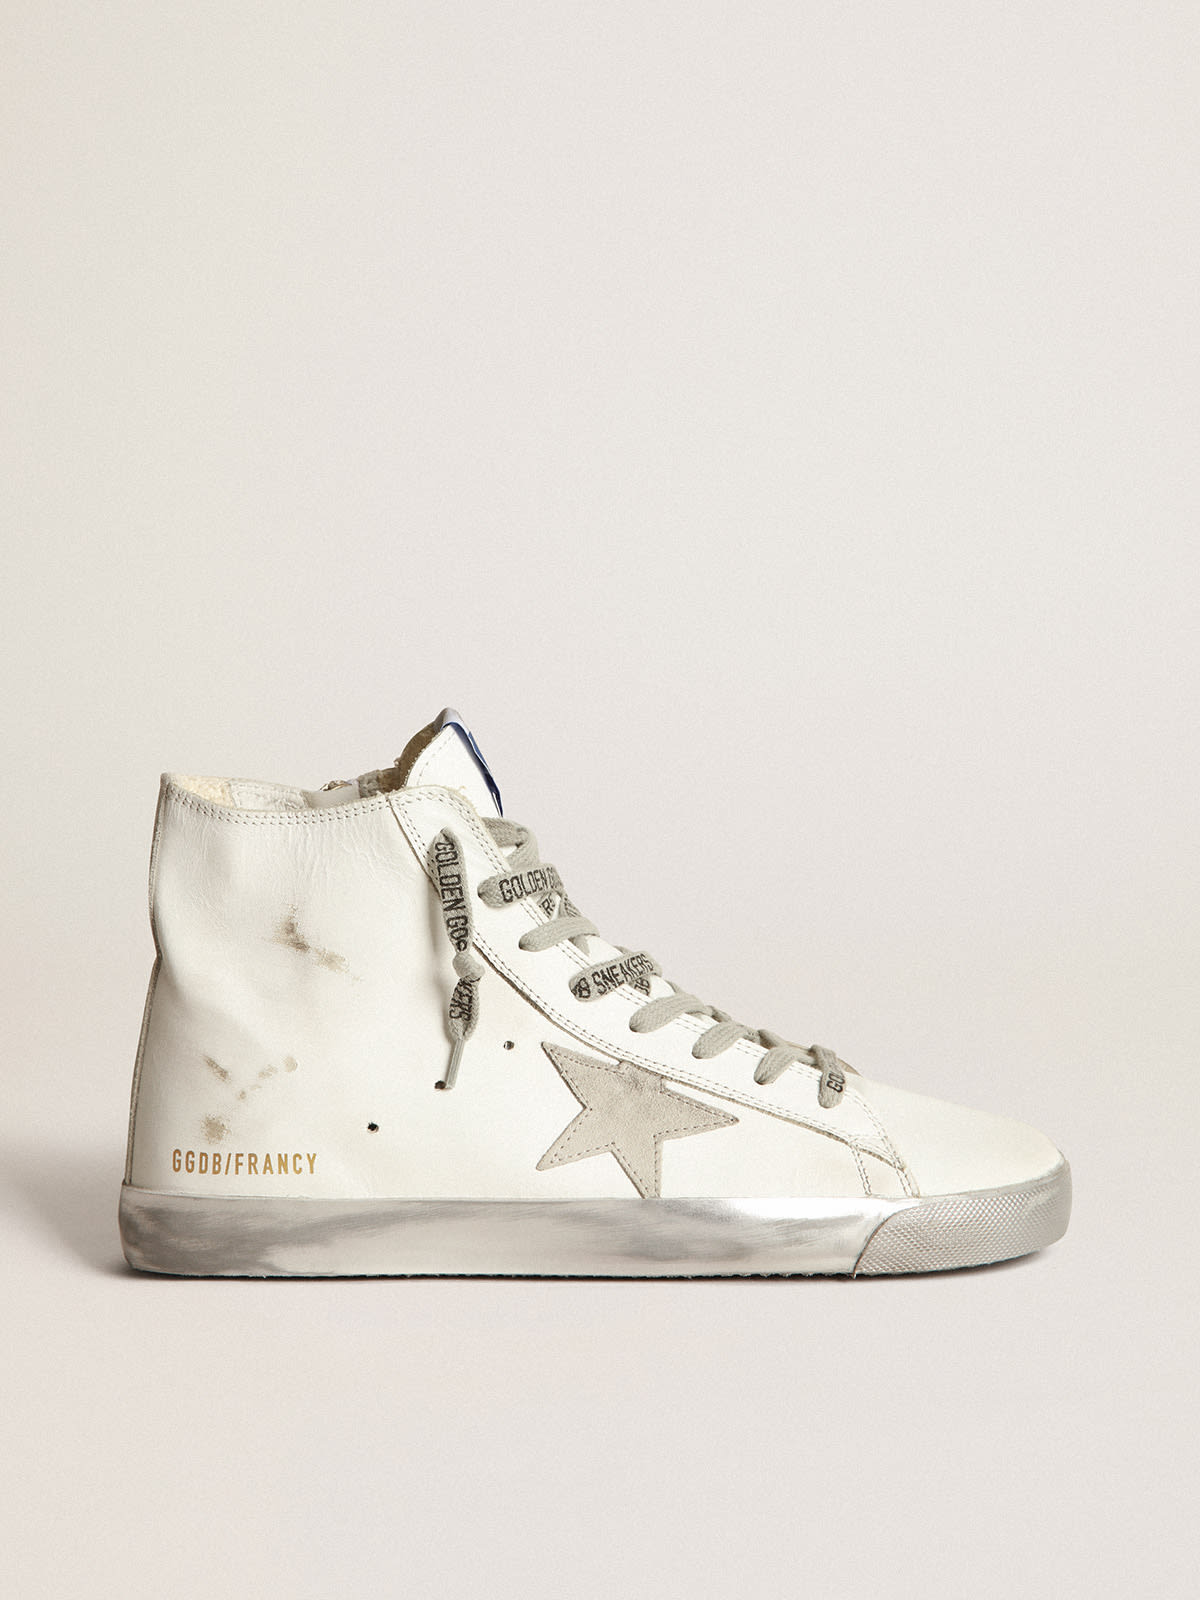 Golden Goose - Francy sneakers in leather with laminated outsole in 